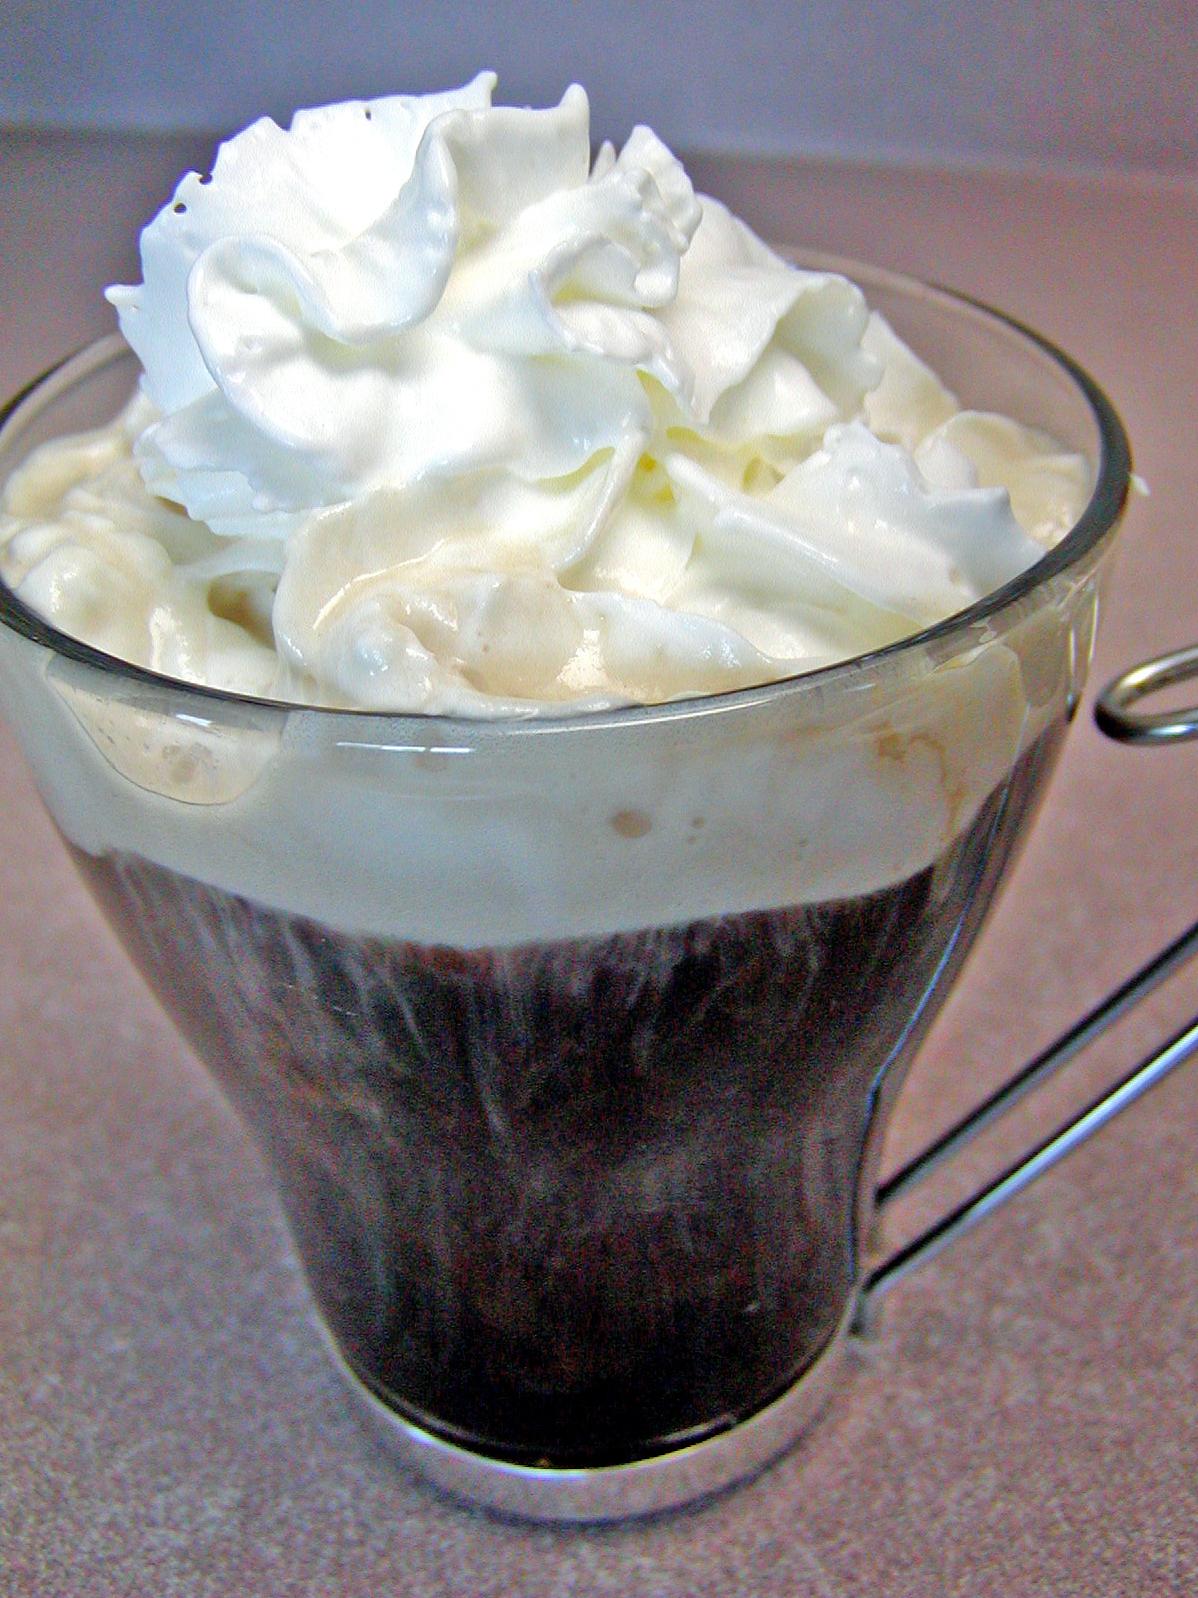  A classic combination of whiskey, coffee and cream.